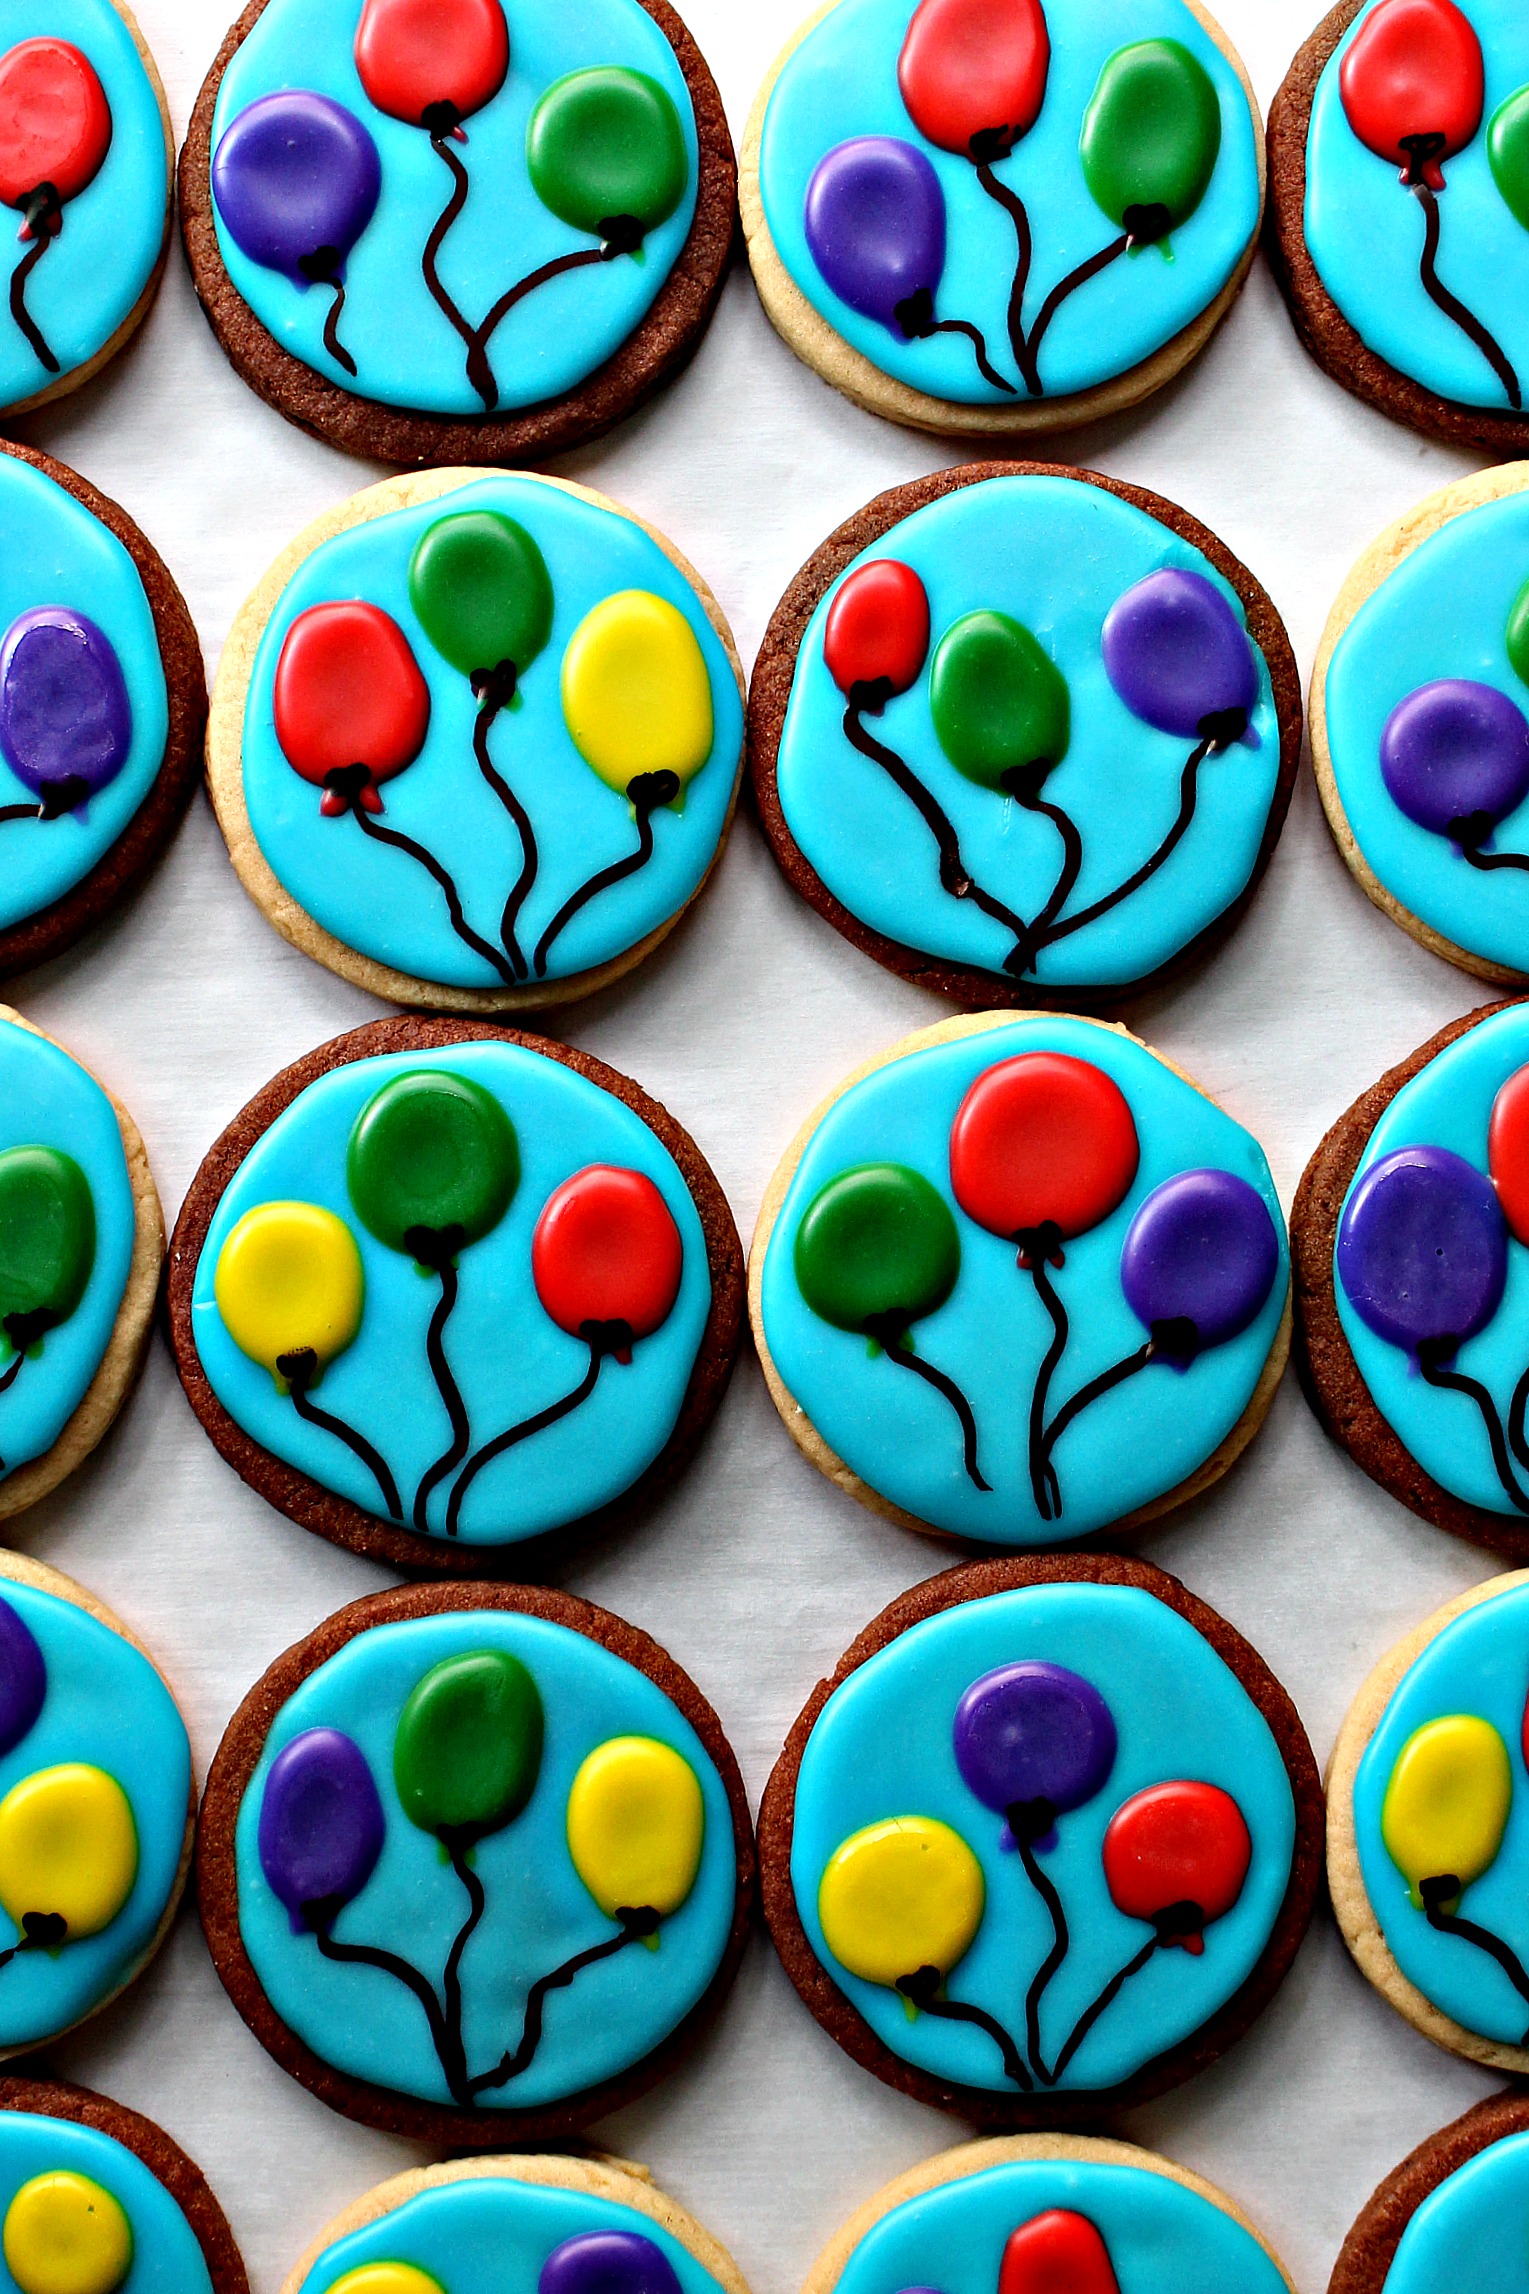 Balloon Sugar Cookies with blue icing background and three circle balloons with black strings.